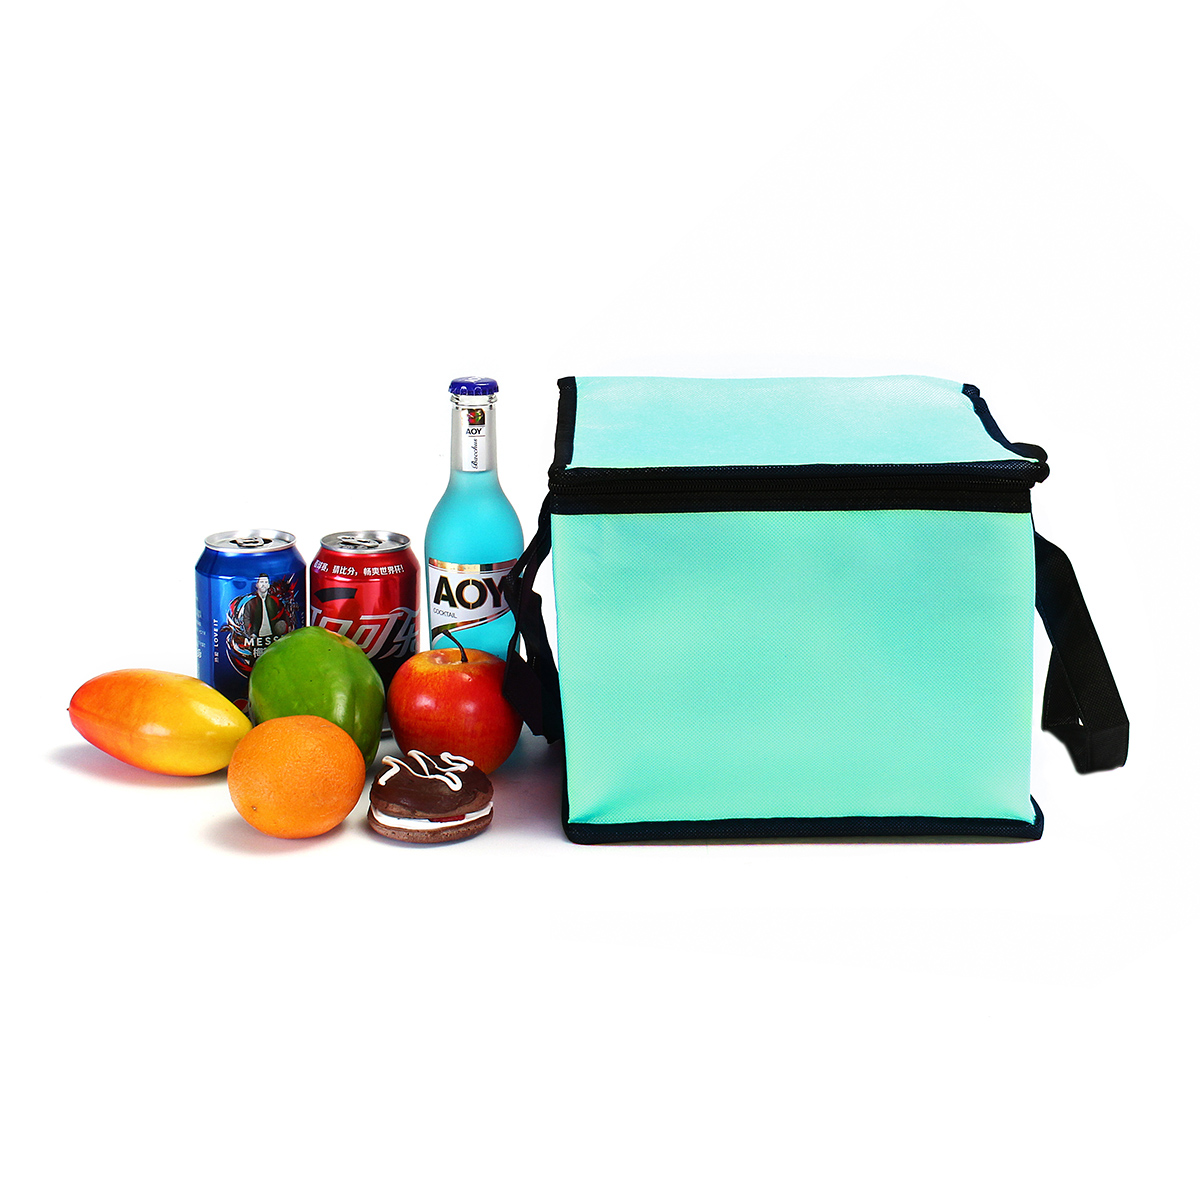 10-Inch-Non-woven-Fresh-Keeping-Tote-Bag-with-Zipper-Cake-Picnic-Lunch-Bag-Reusable-Grocery-Bag-1353010-12